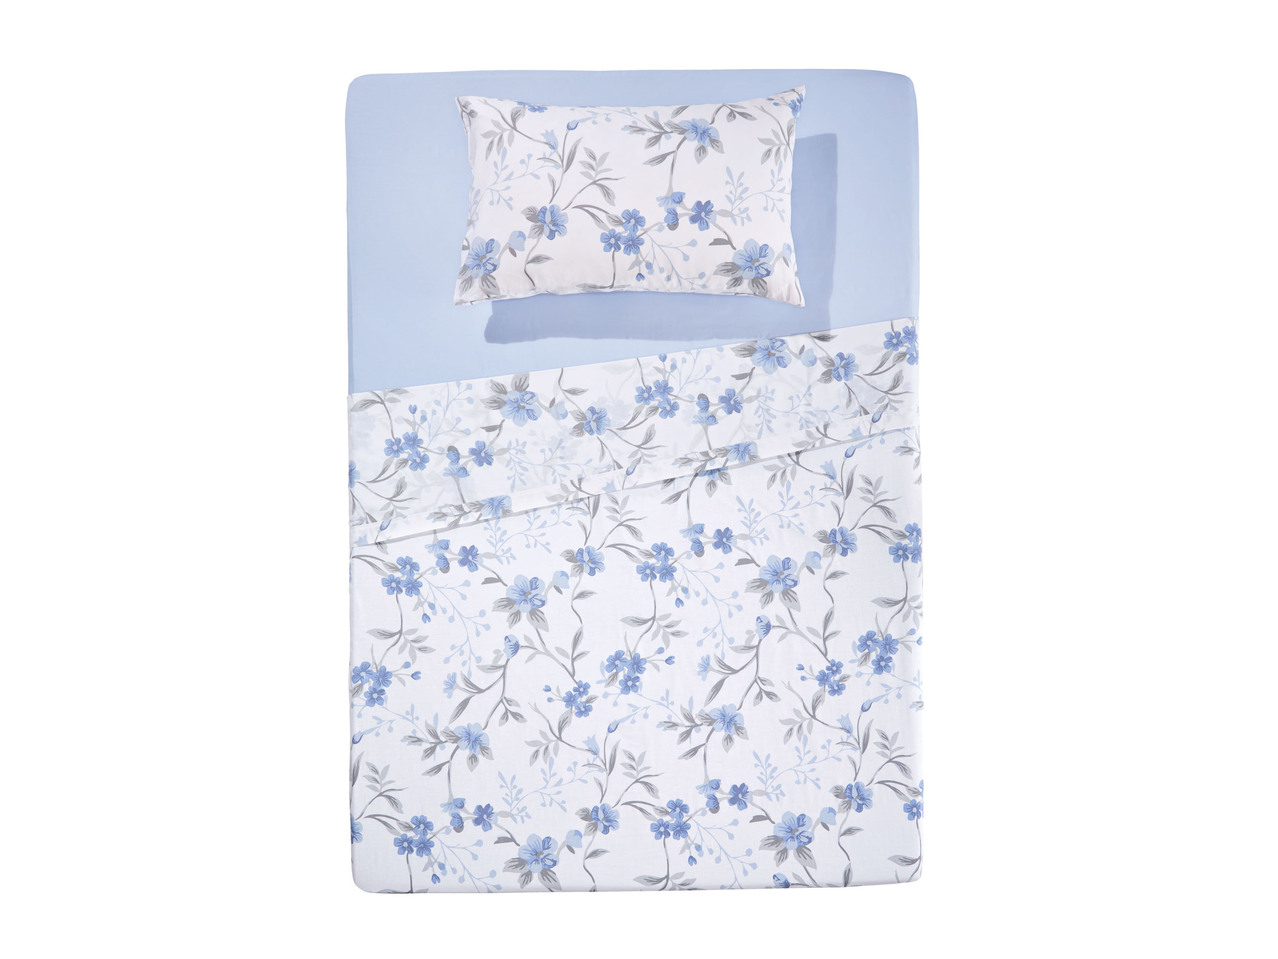 Single or One and a Half Size Bedlinen Set